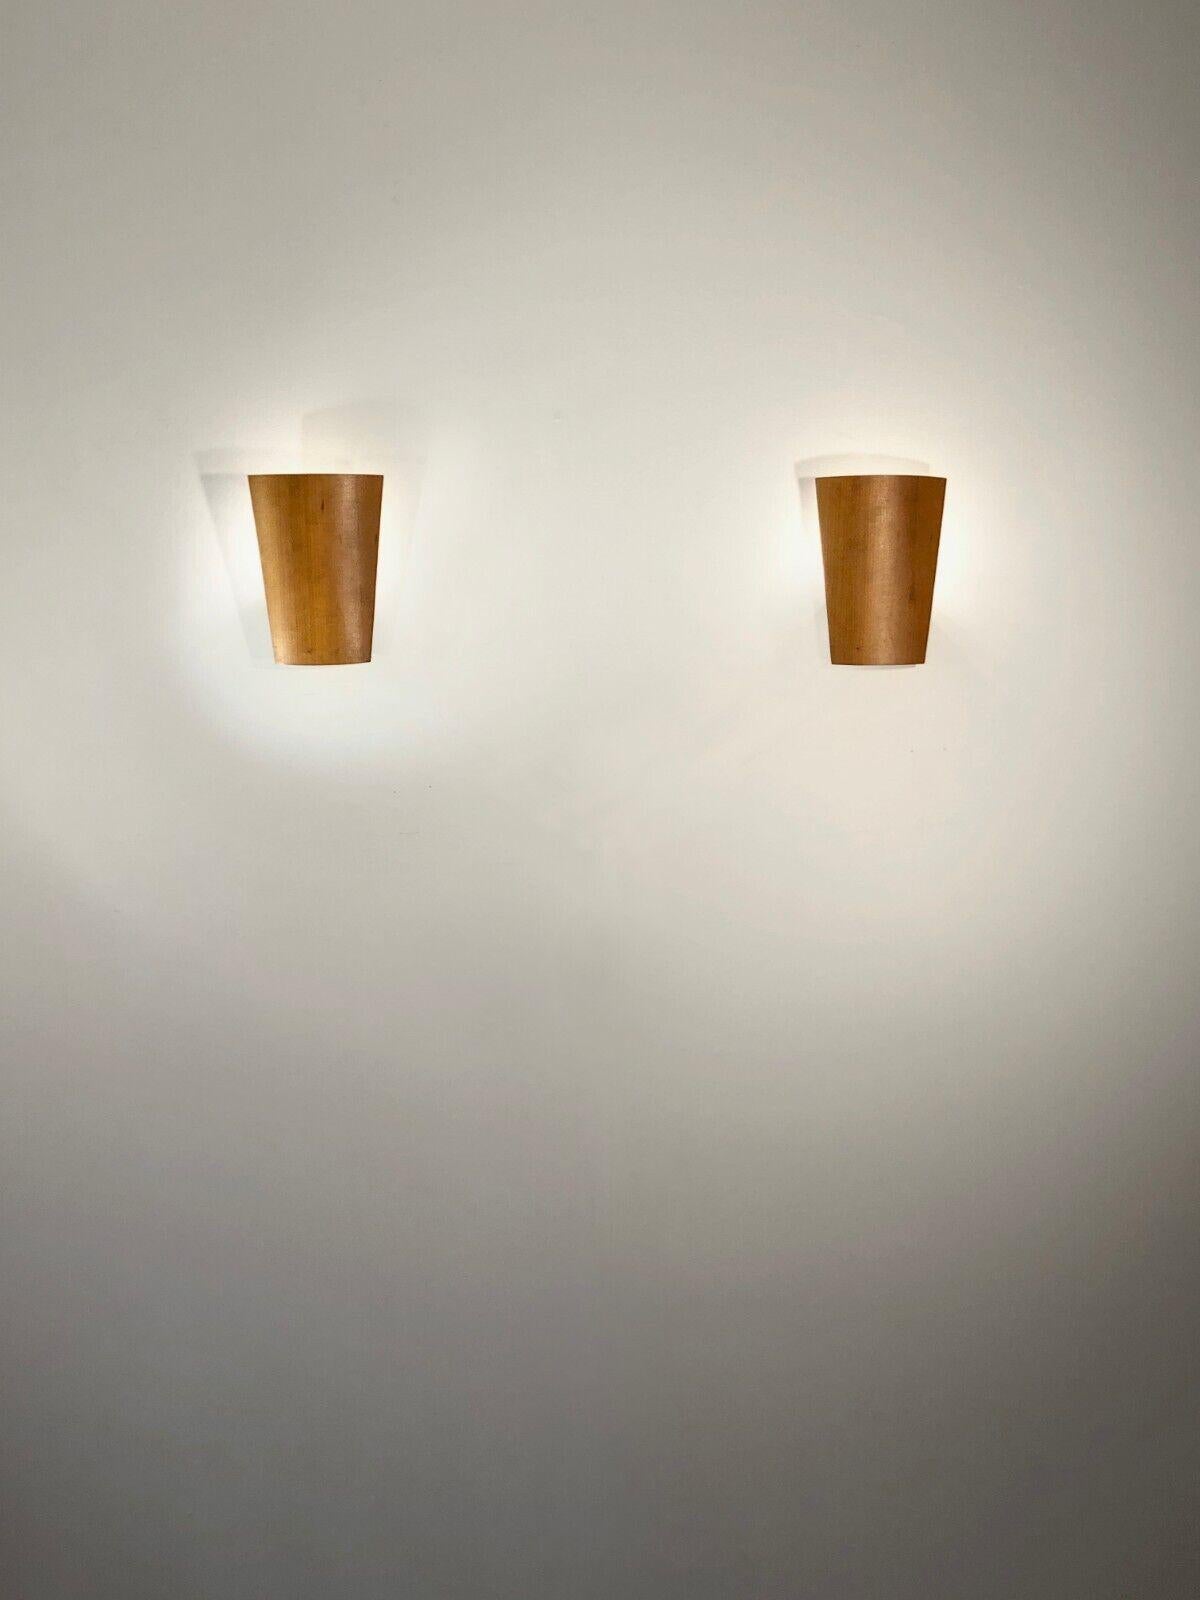 Metal A Pair of Post-Modern WALL APPLIQUES SCONCES by LUCID, France 1990 For Sale